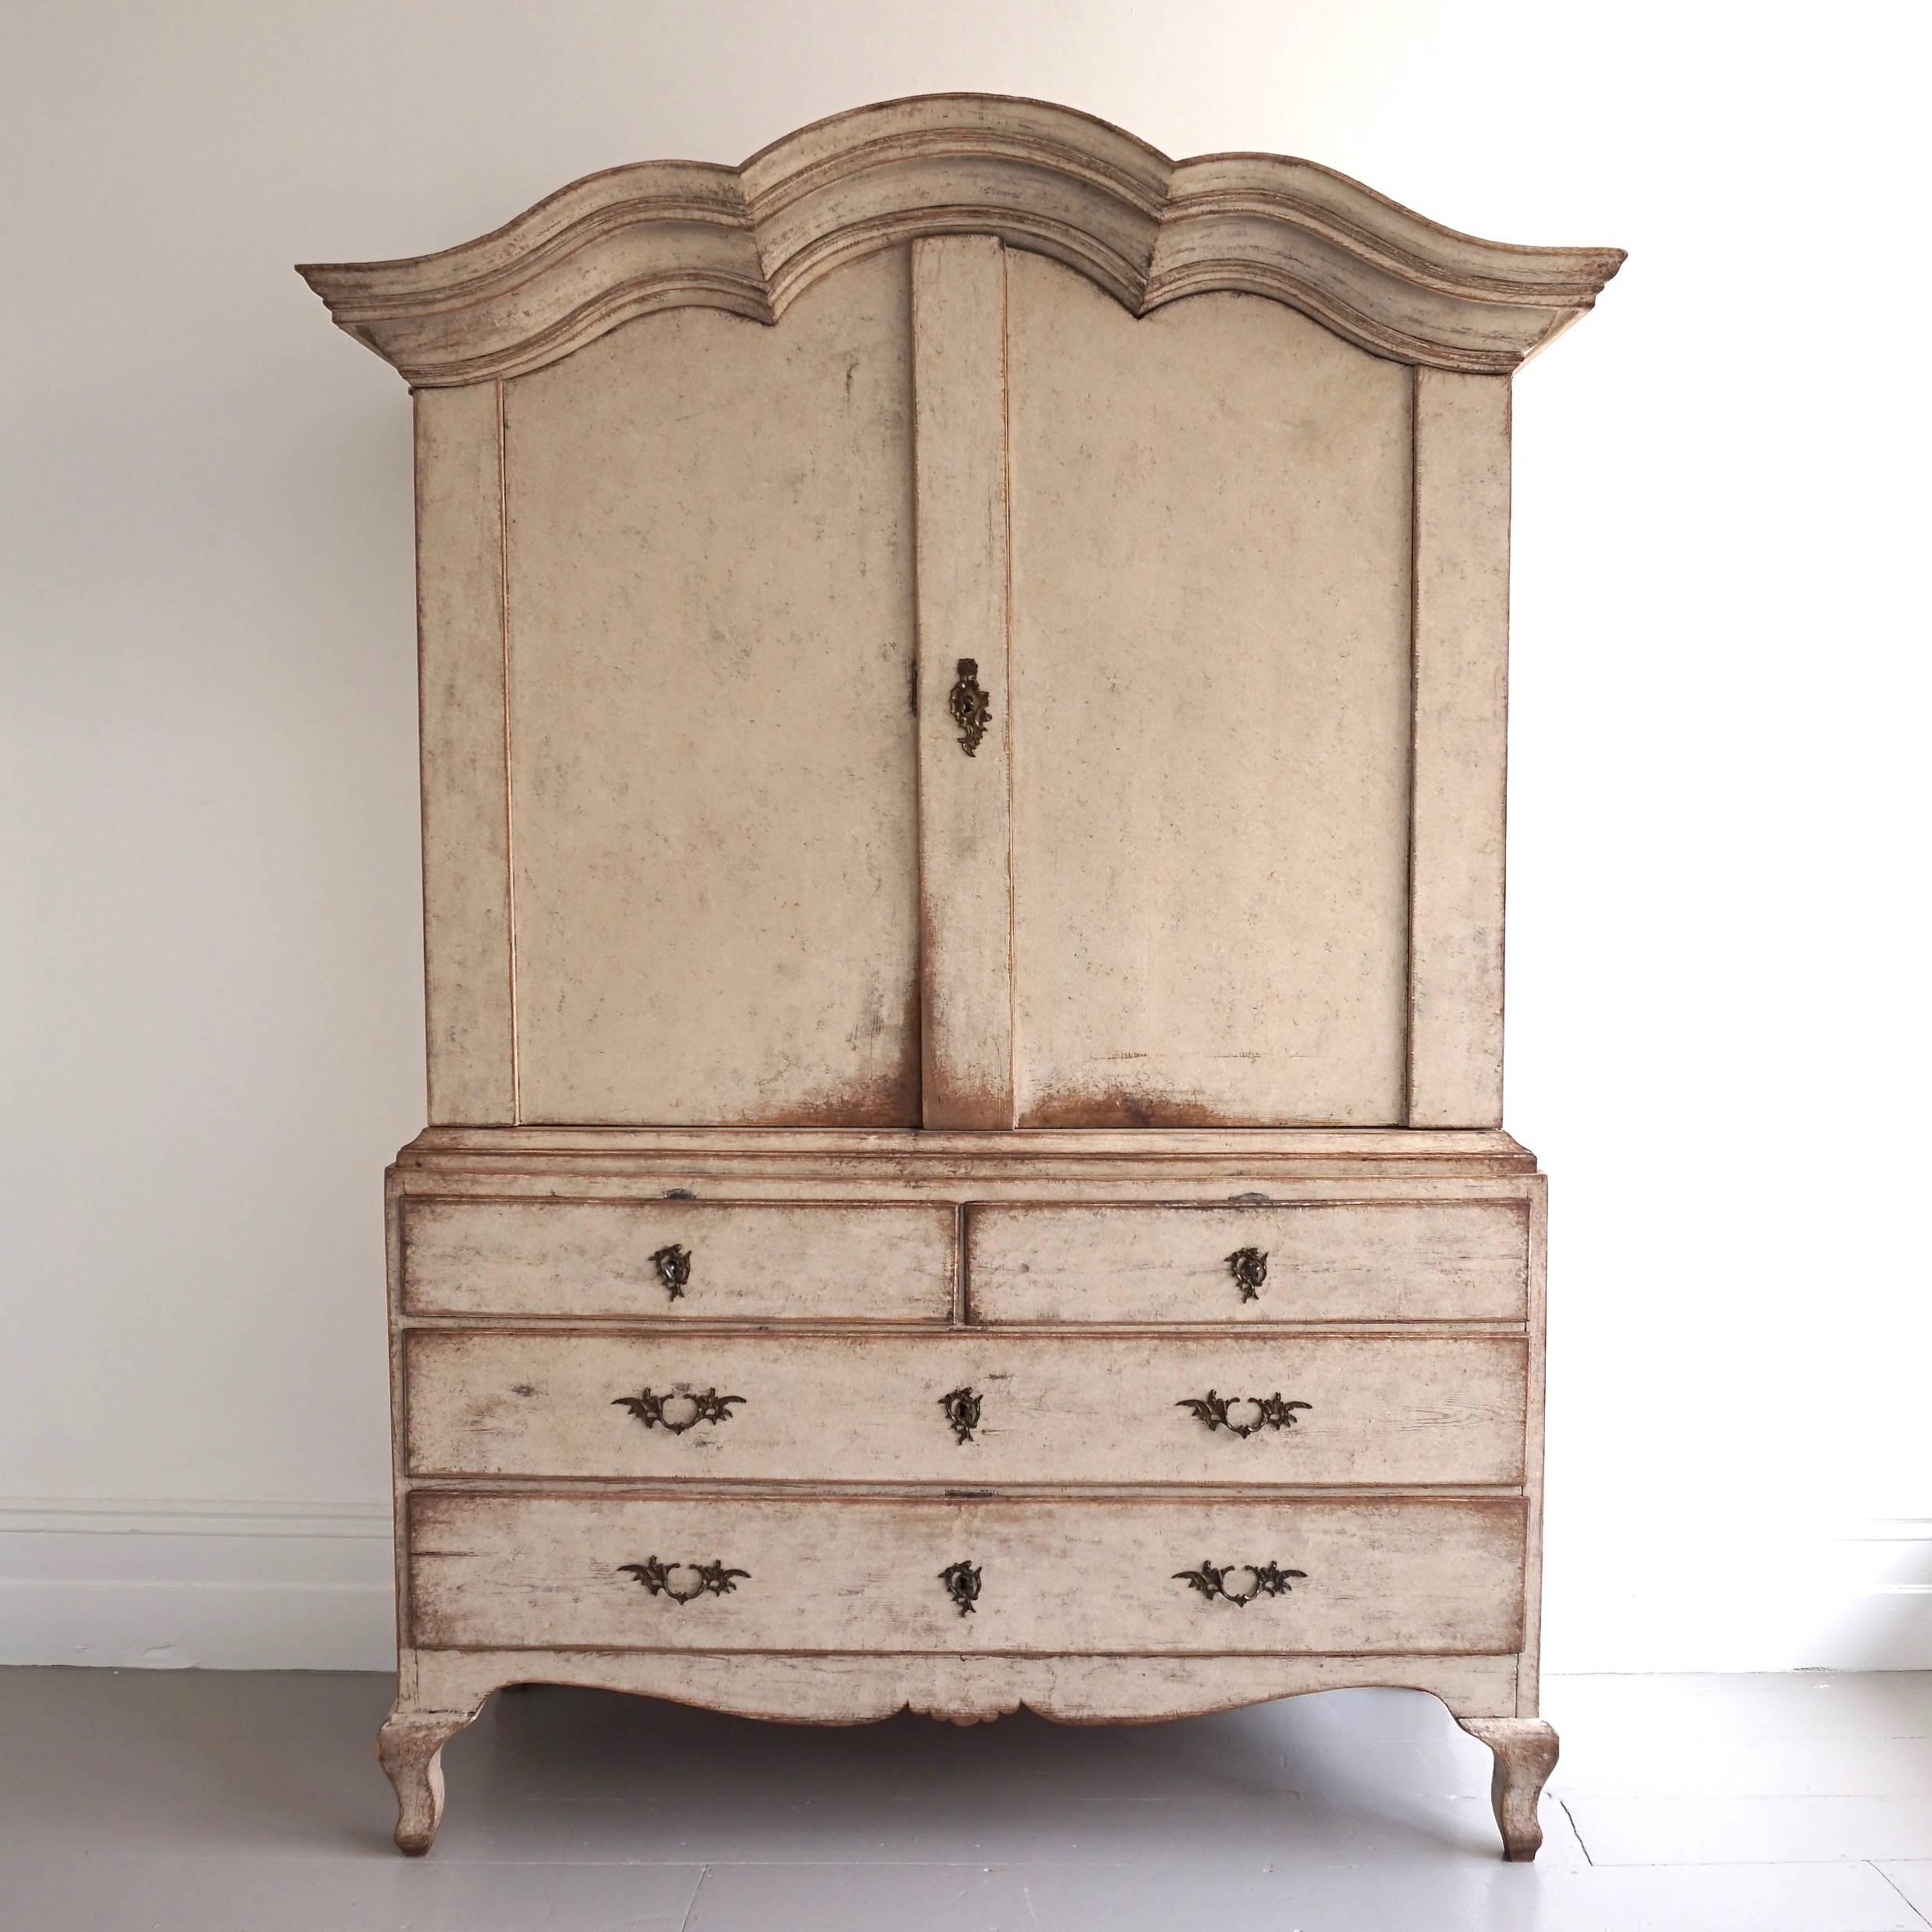 A very rare grand scale 18th century Rococo period cabinet or linen press, with a particularly striking and unusually exaggerated overhanging arched pediment cornice of rare beauty. This cabinet is in excellent condition and has a wonderful antique